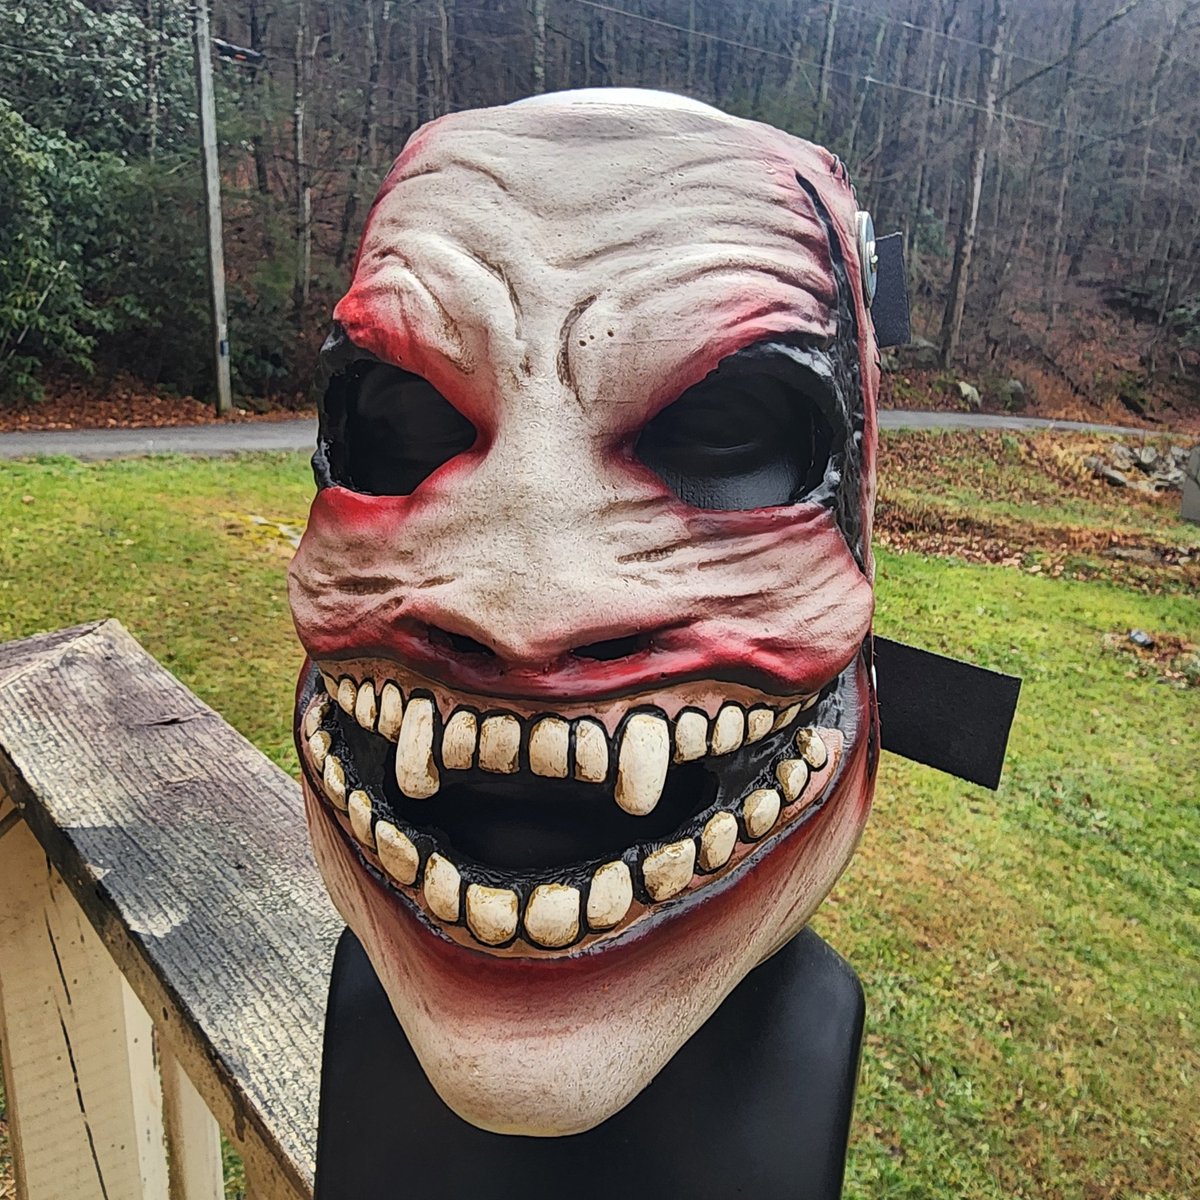 For those who care... I'm back!! New insta and YouTube channel!! Tons of new stuff coming up this year. Commissions are open and welcome. 
#slipknot #slipknotmask #thefiend #thefiendbraywyatt #WWE #etsy #etsyshop #YouTube #youtubechannel #cosplay #justmattmakes